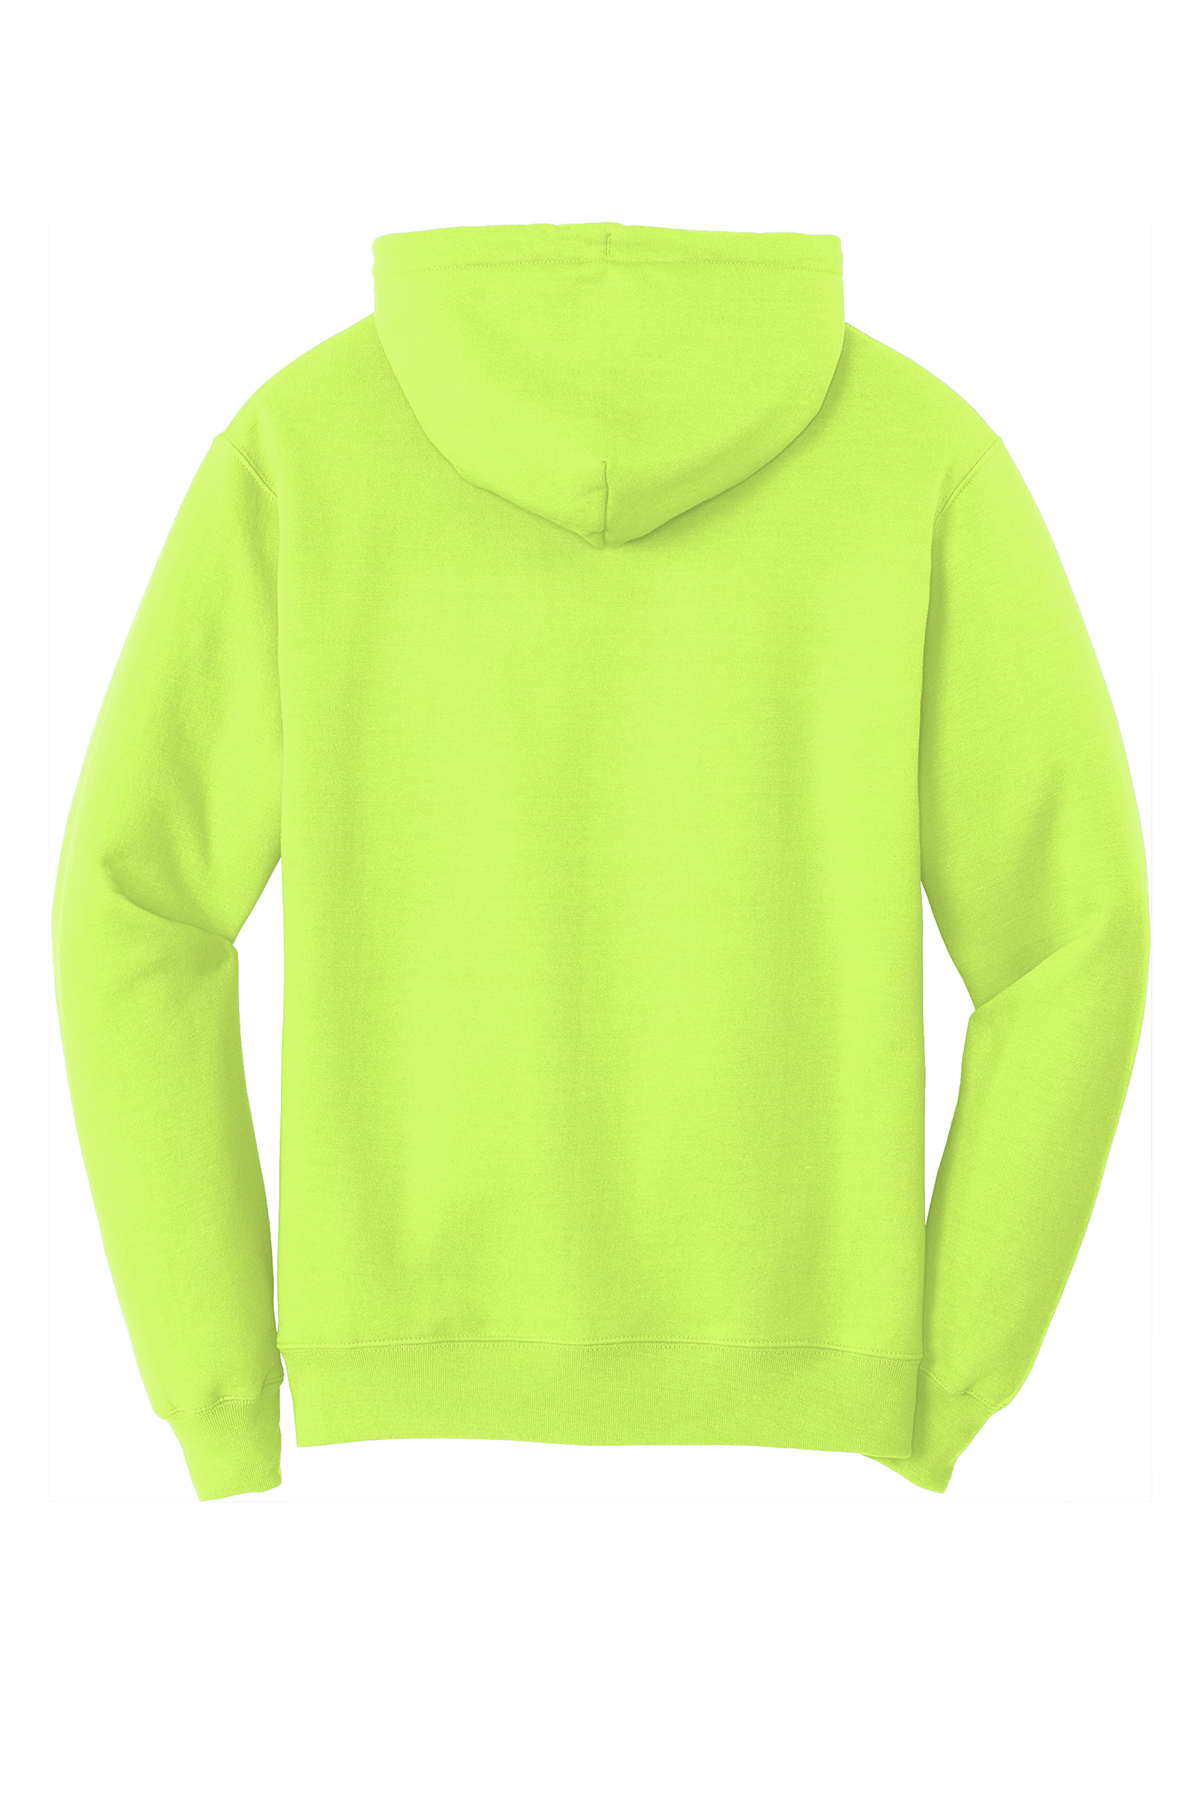 #SWAG Bright Neon Yellow Adult Pullover Hoodie Small